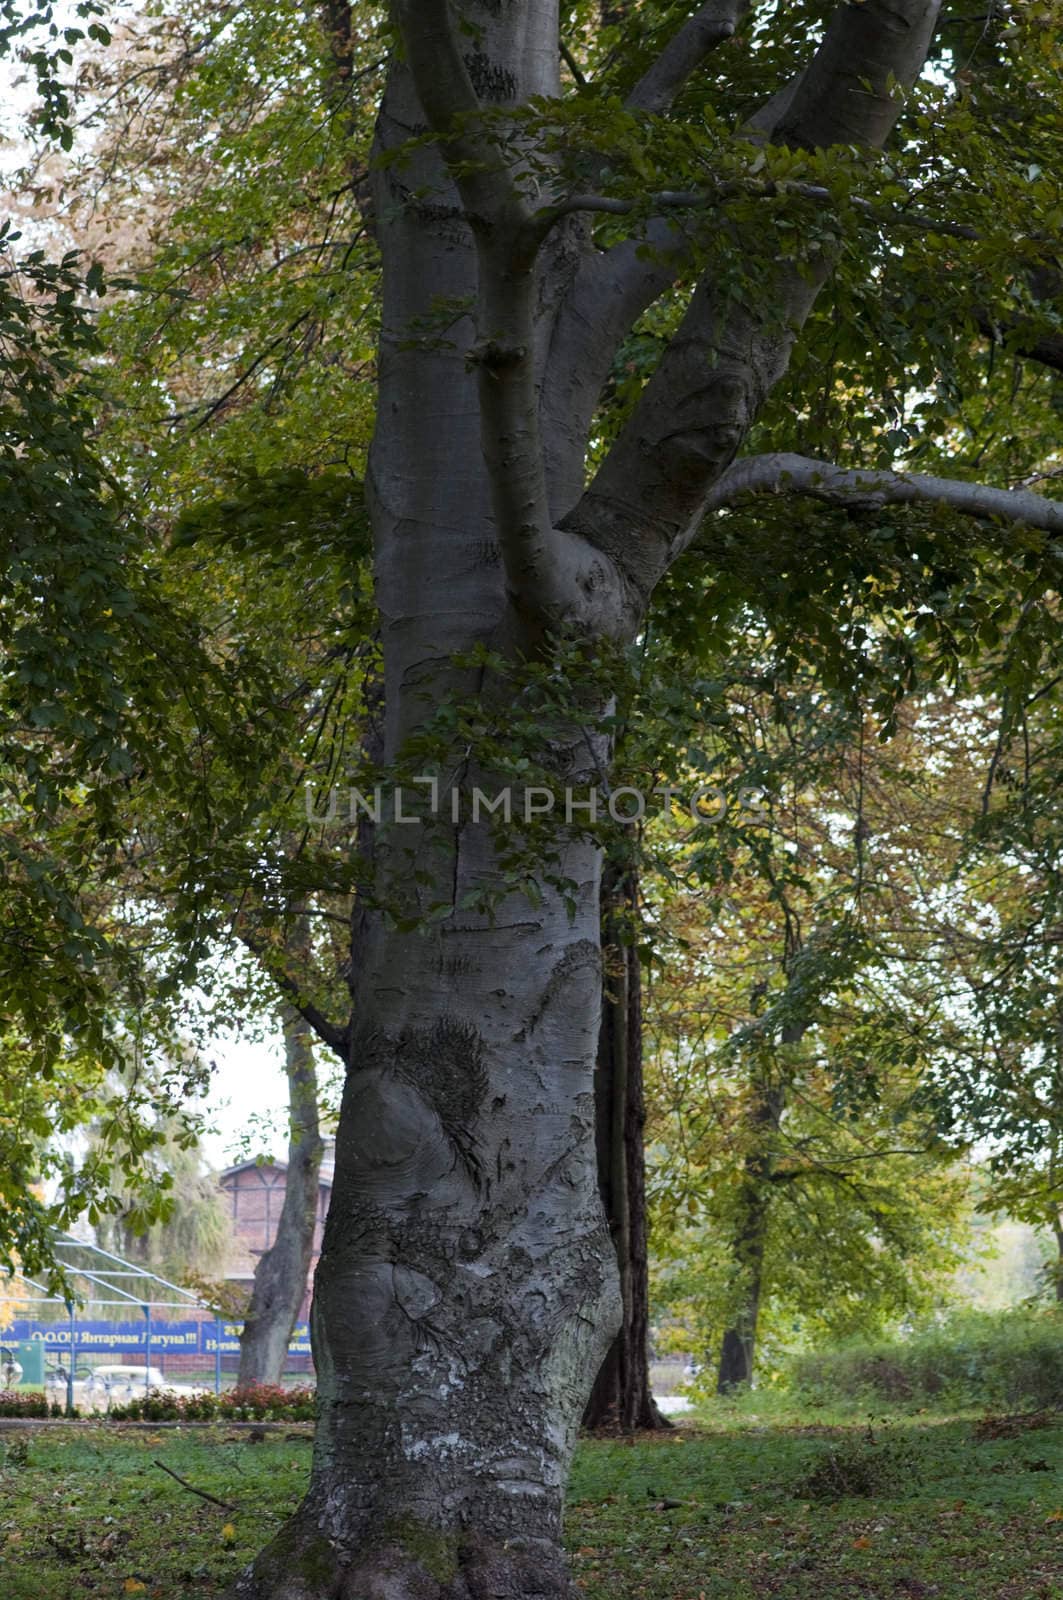 High resolution image. Avenue in park. Old tree in city park.